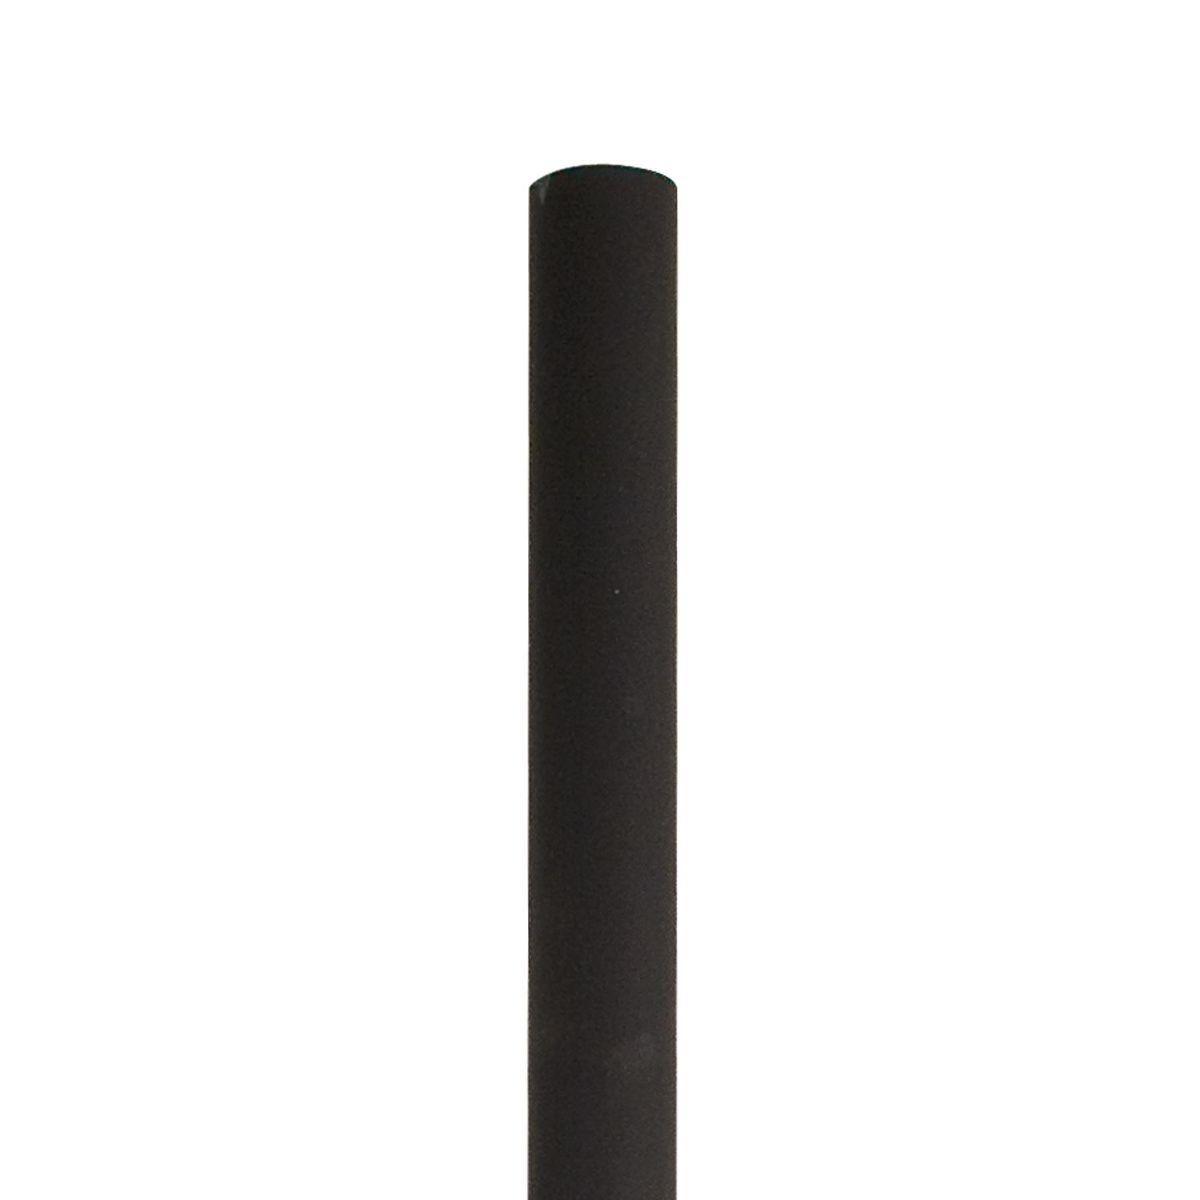 8 ft Round Aluminum Direct Burial Pole 3 In. Shaft Black Finish